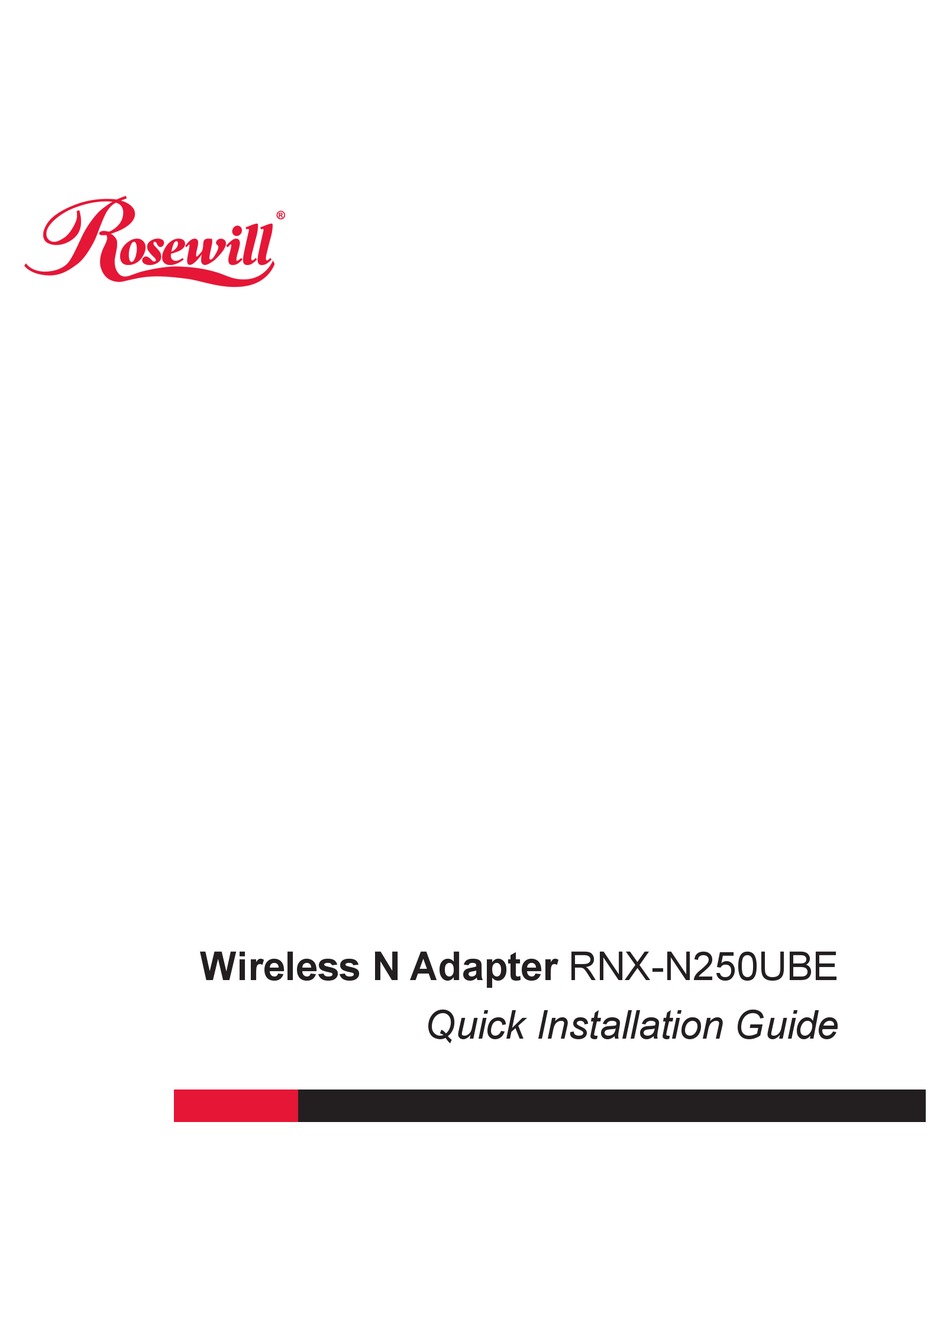 rosewill media downloadable drivers rnx ac1300pce